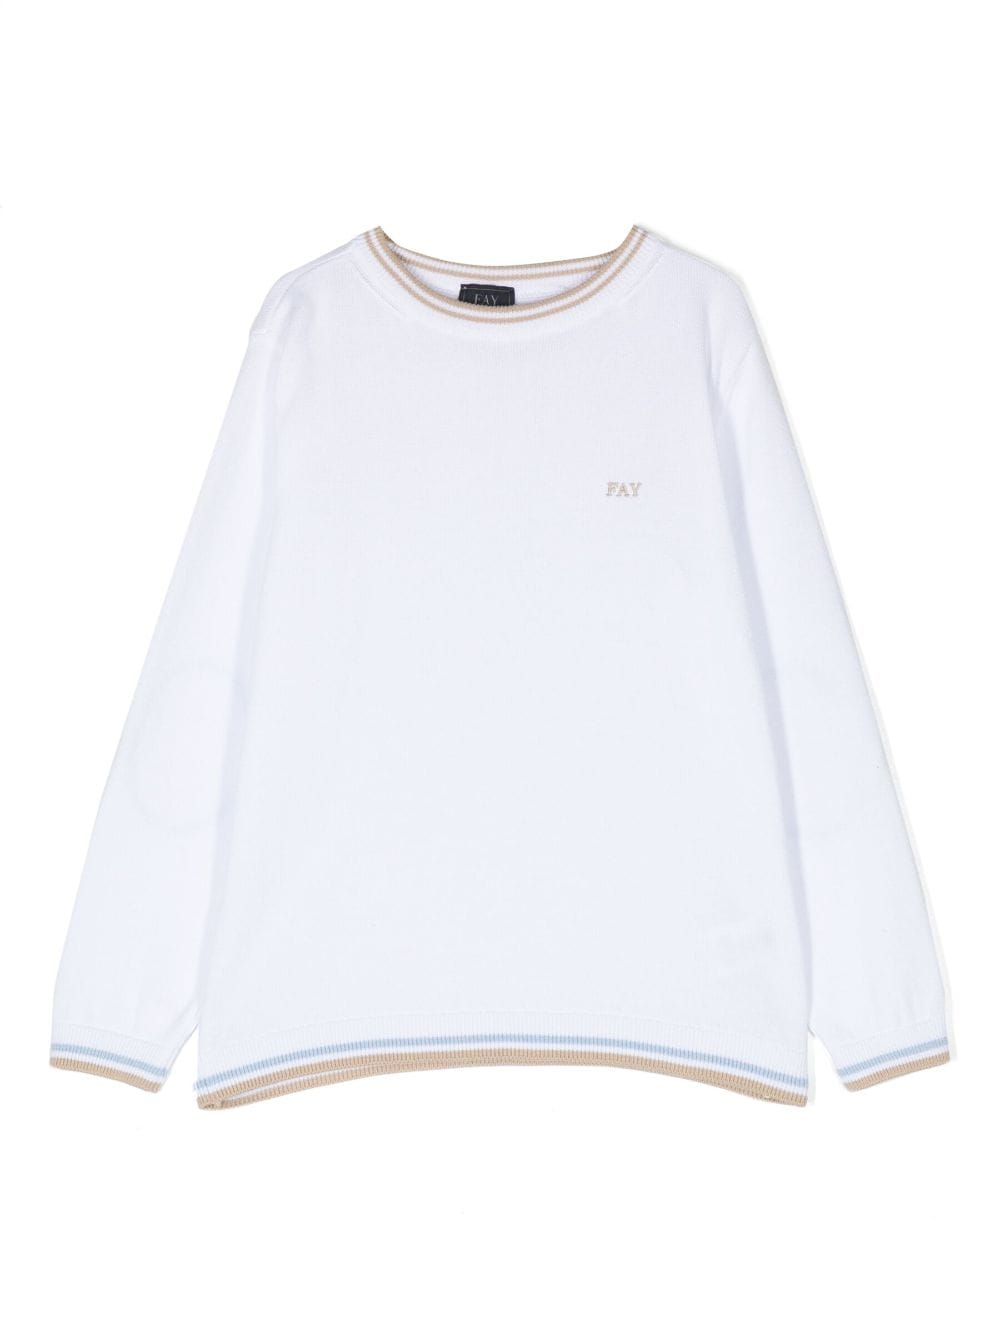 Fay Kids logo-embroidered knitted jumper - White von Fay Kids